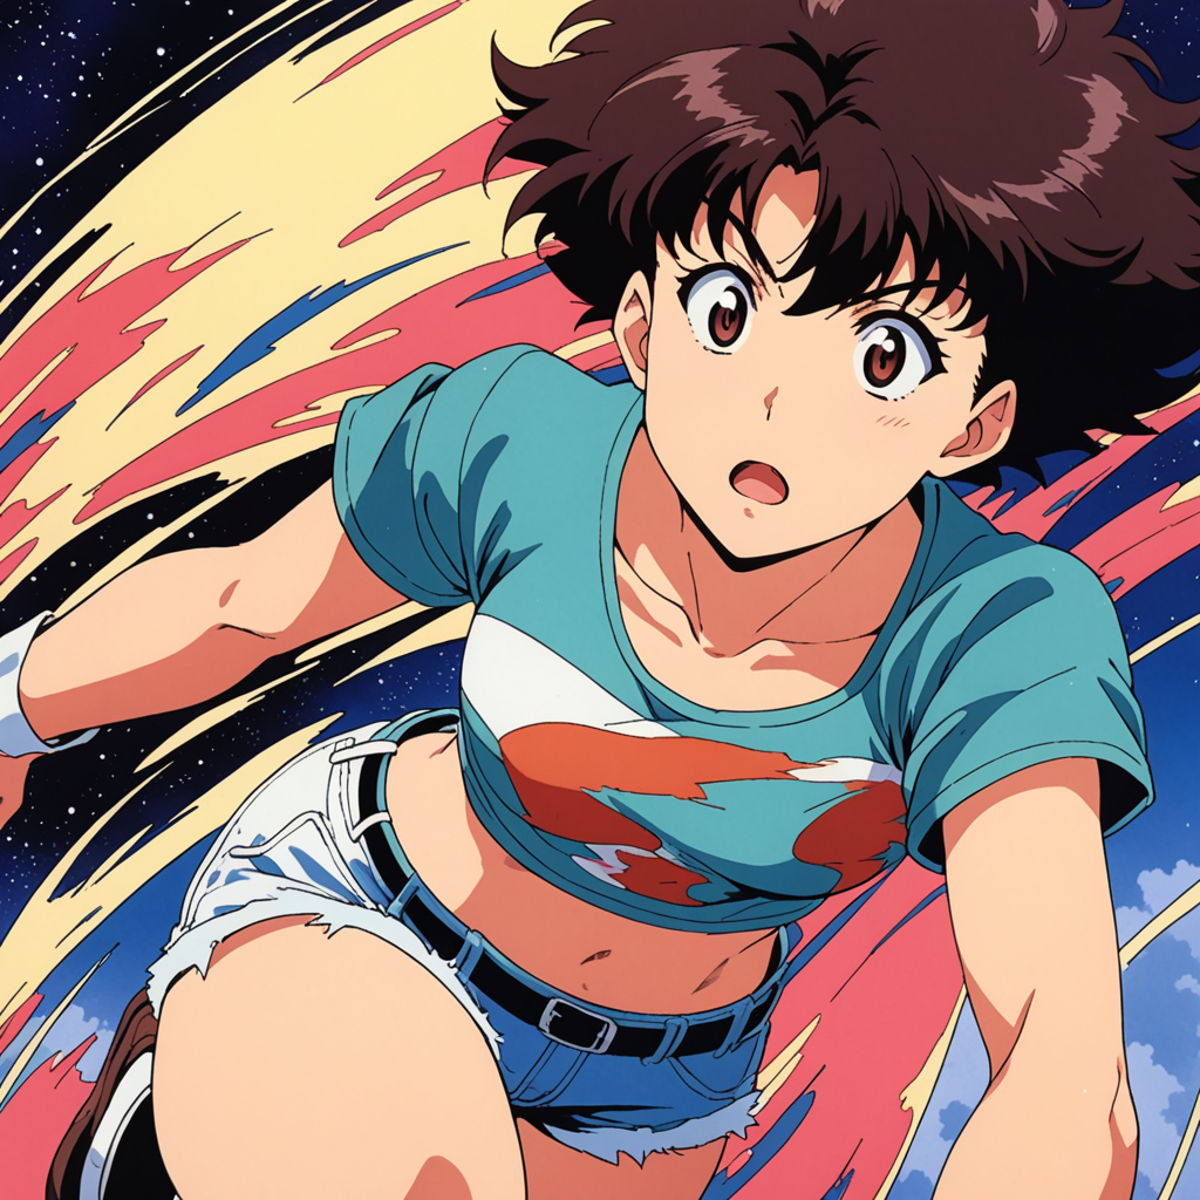 A young woman wearing a blue shirt and jean shorts with a red belt, running through a colorful background.